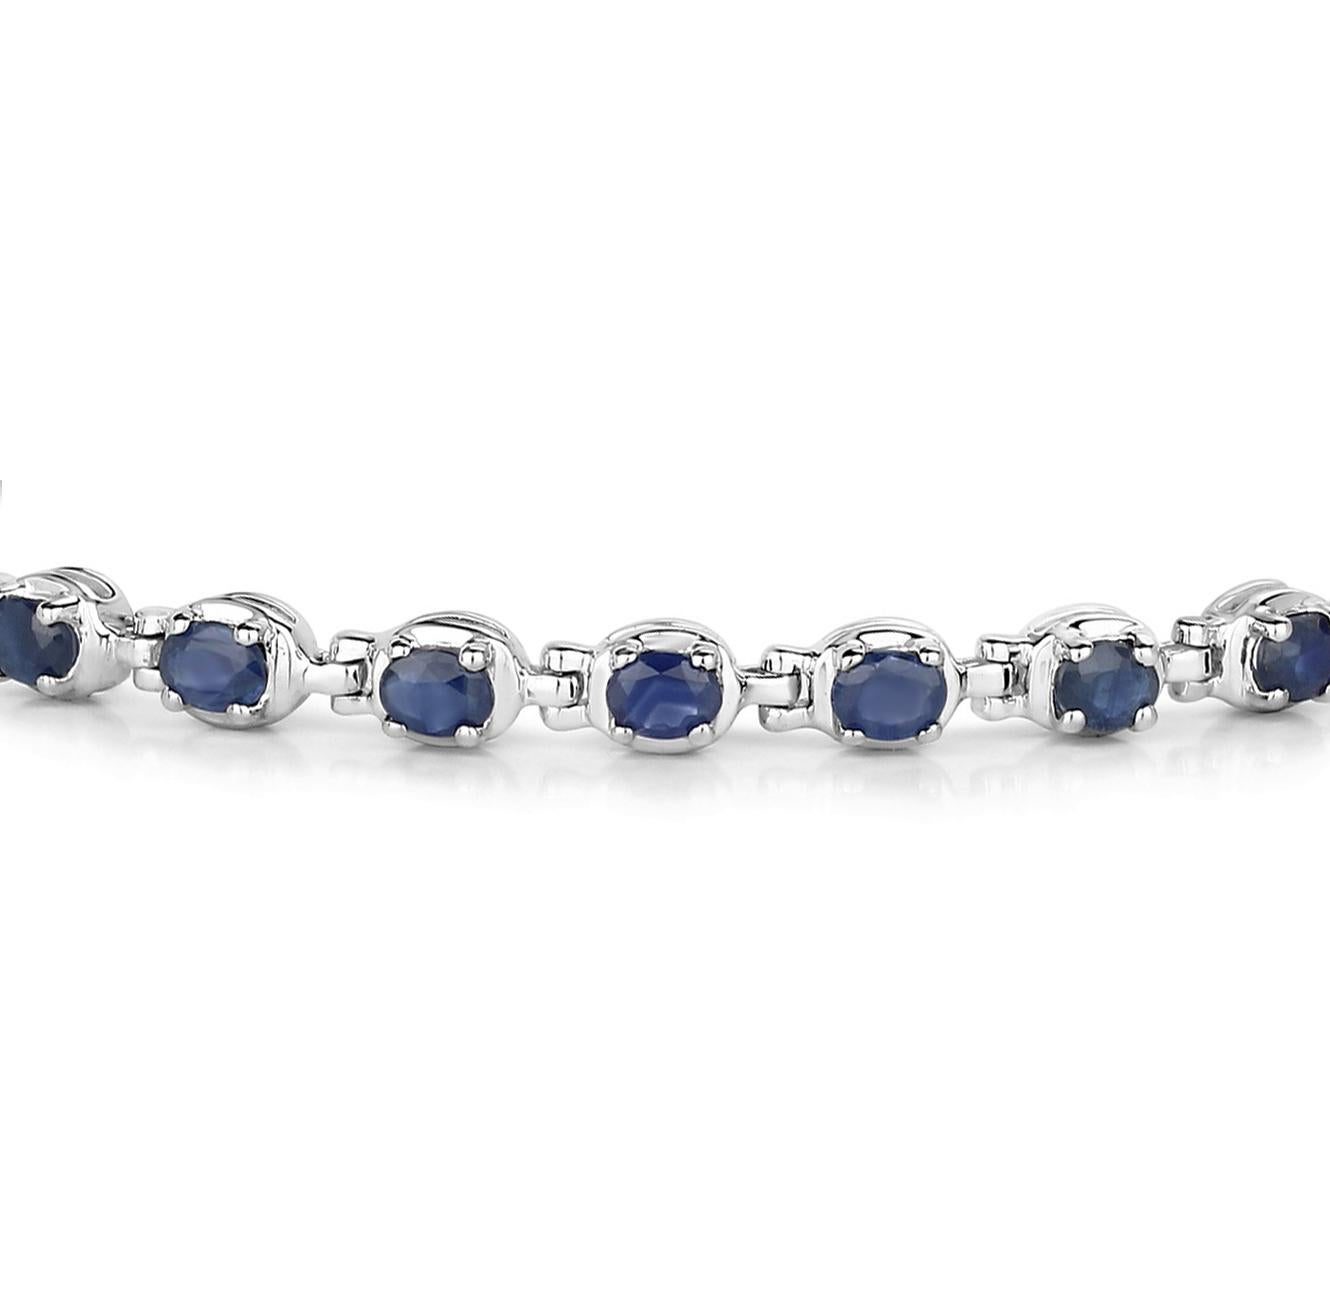 Blue Oval Cut Sapphire Tennis Bracelet 5 Carats In New Condition For Sale In Laguna Niguel, CA